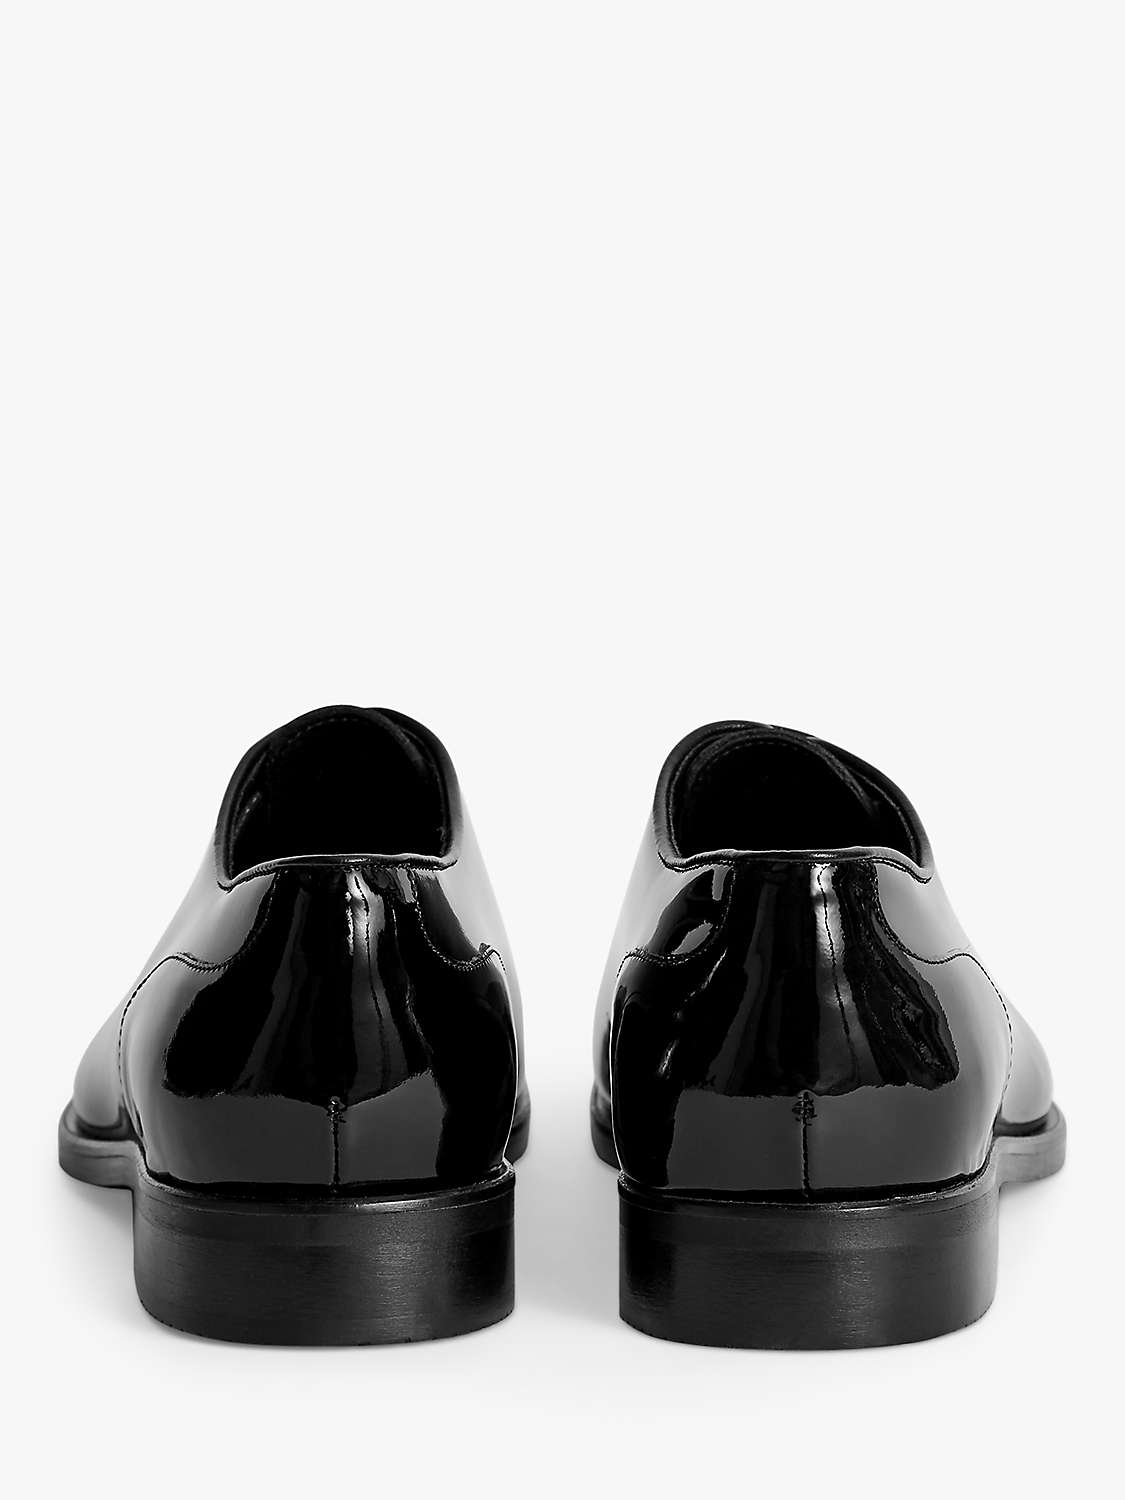 Buy Reiss Bay Patent Leather Whole Cut Shoes, Black Online at johnlewis.com